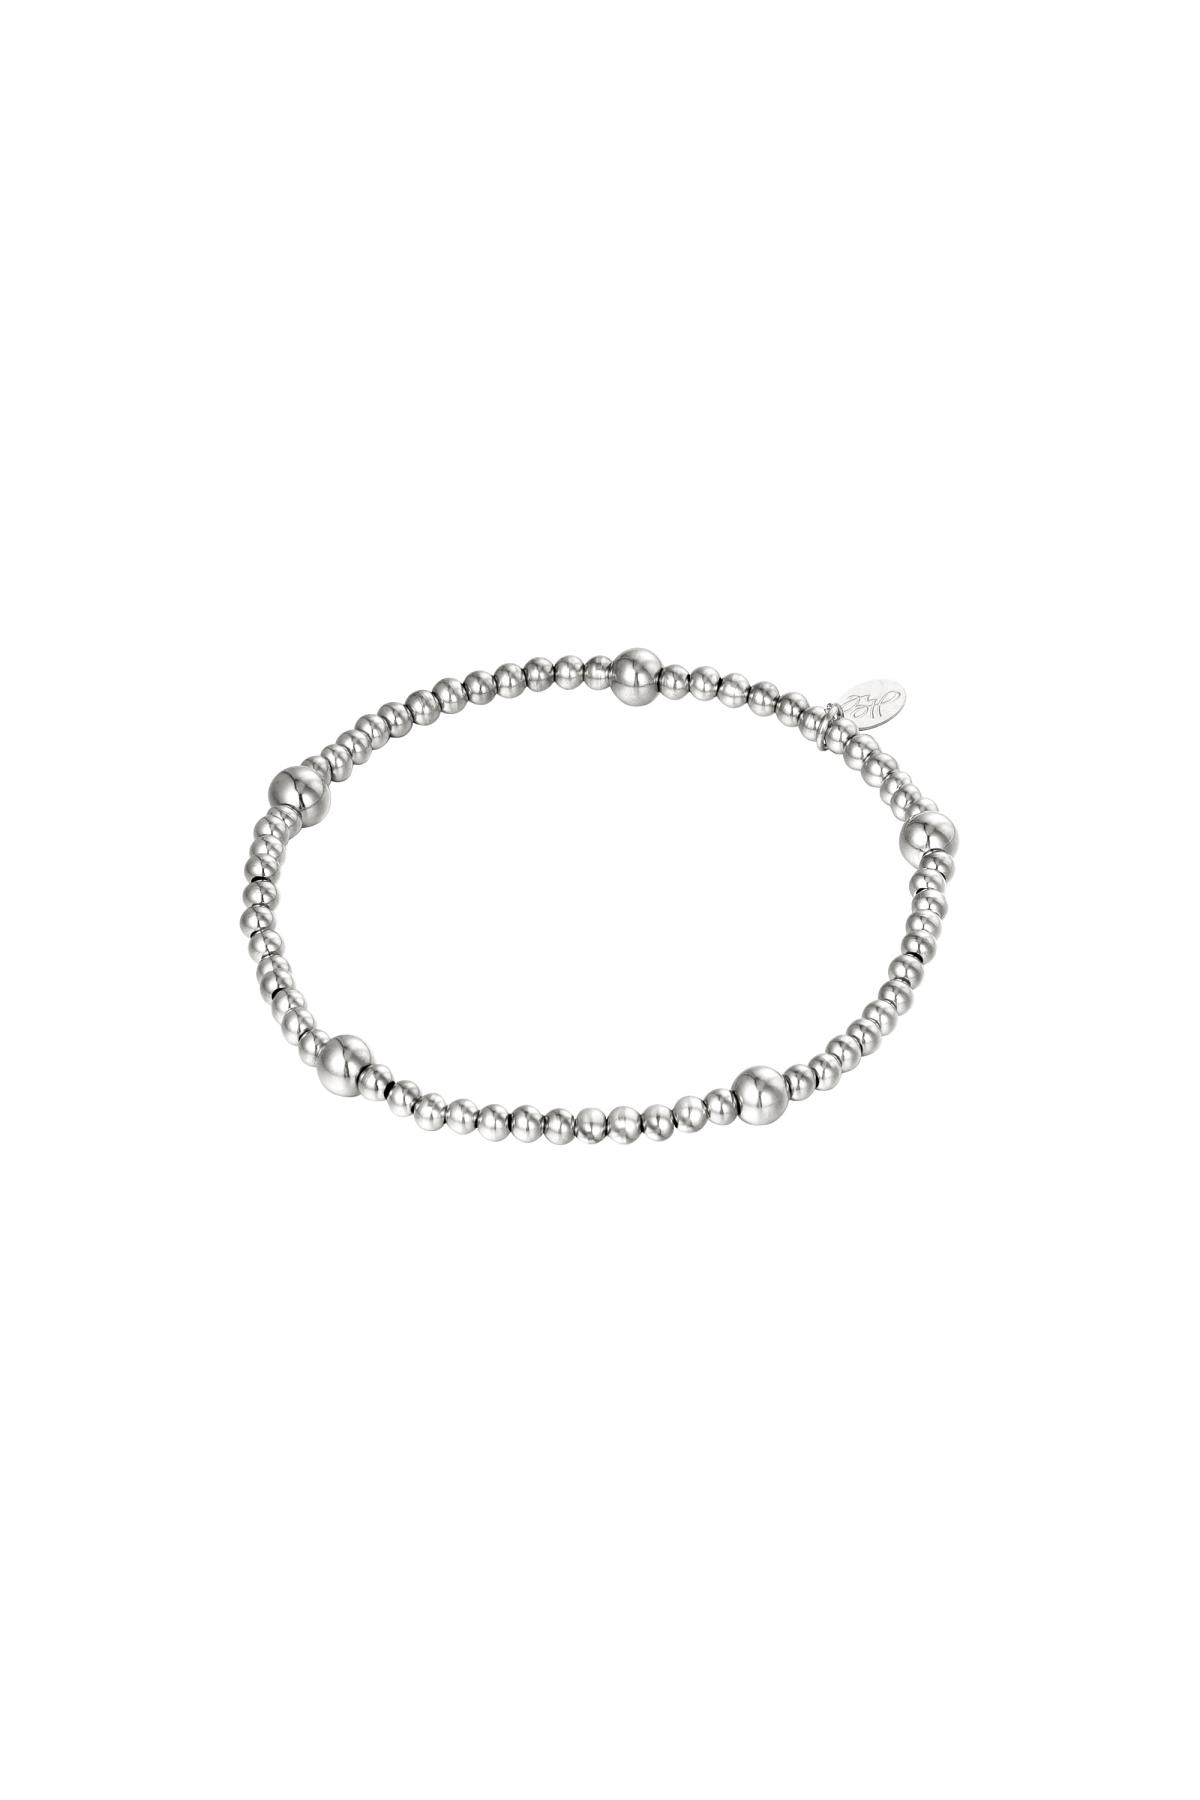 Silver / Bracciale Perline Silver Stainless Steel Immagine2